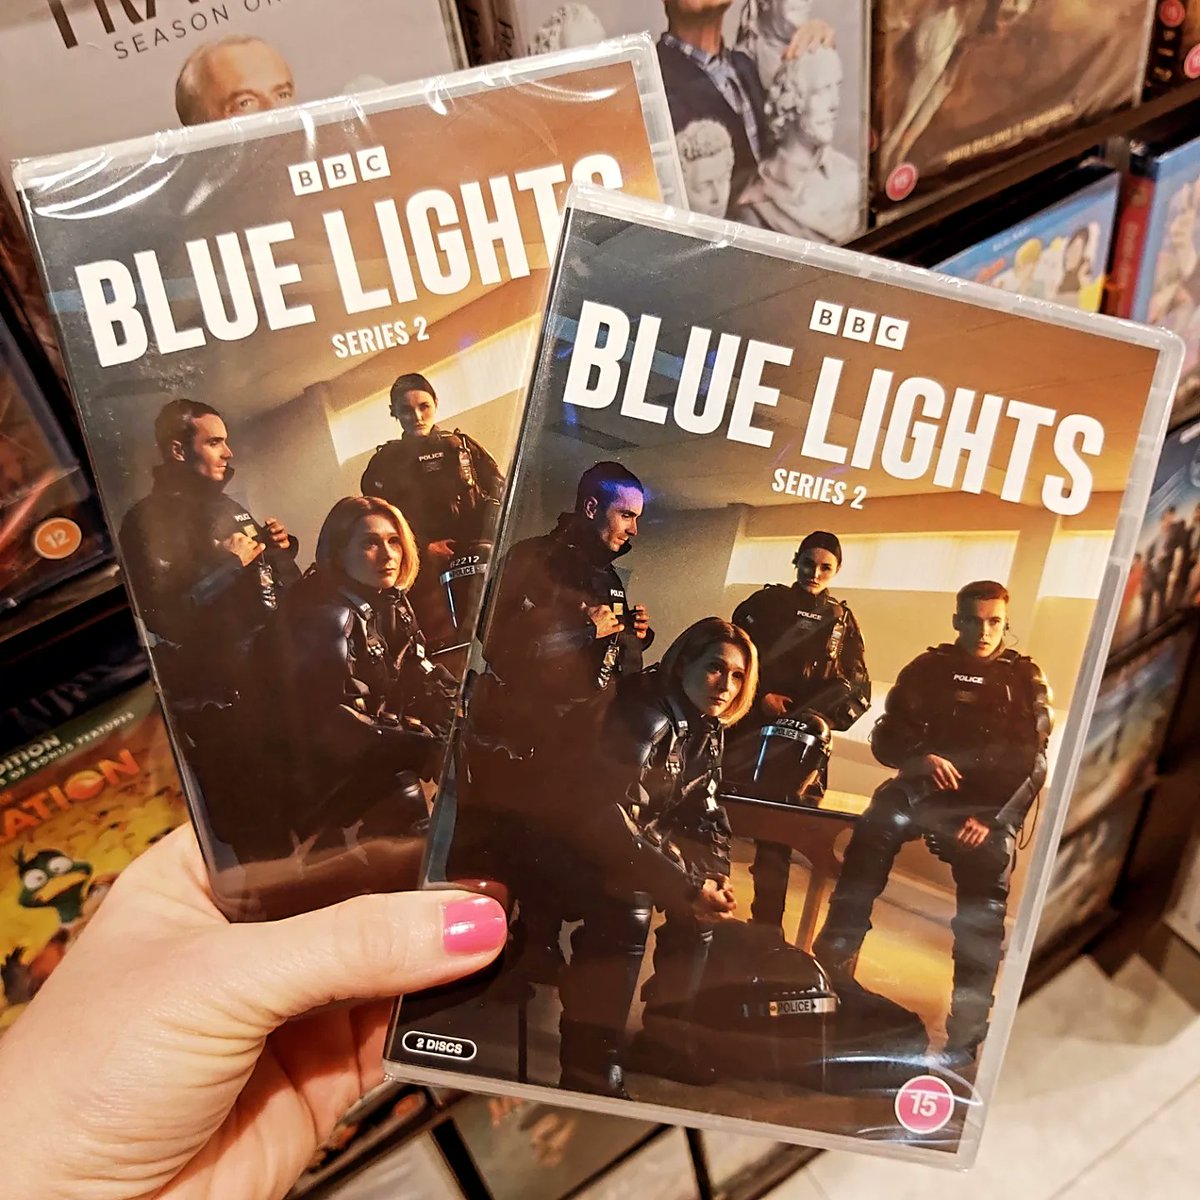 More new releases out today 
#MadameWeb 
#BlueLights 
#Marvel 
#NewMovieMonday